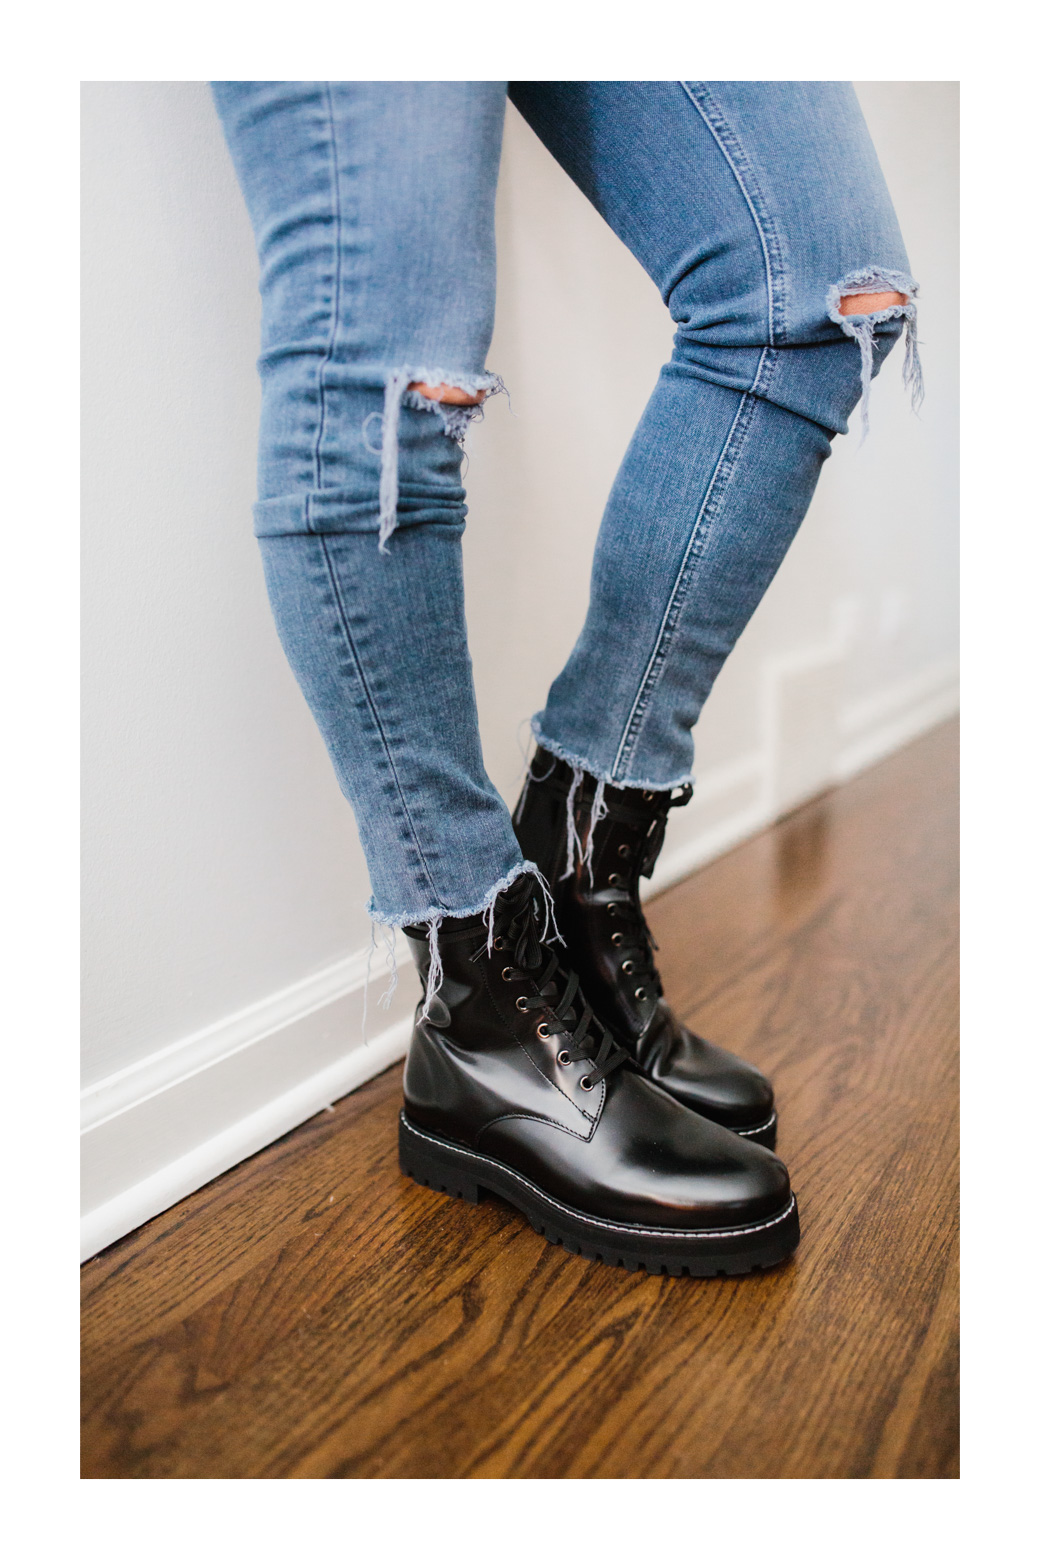 How To Wear Combat Boots Never Without Navy